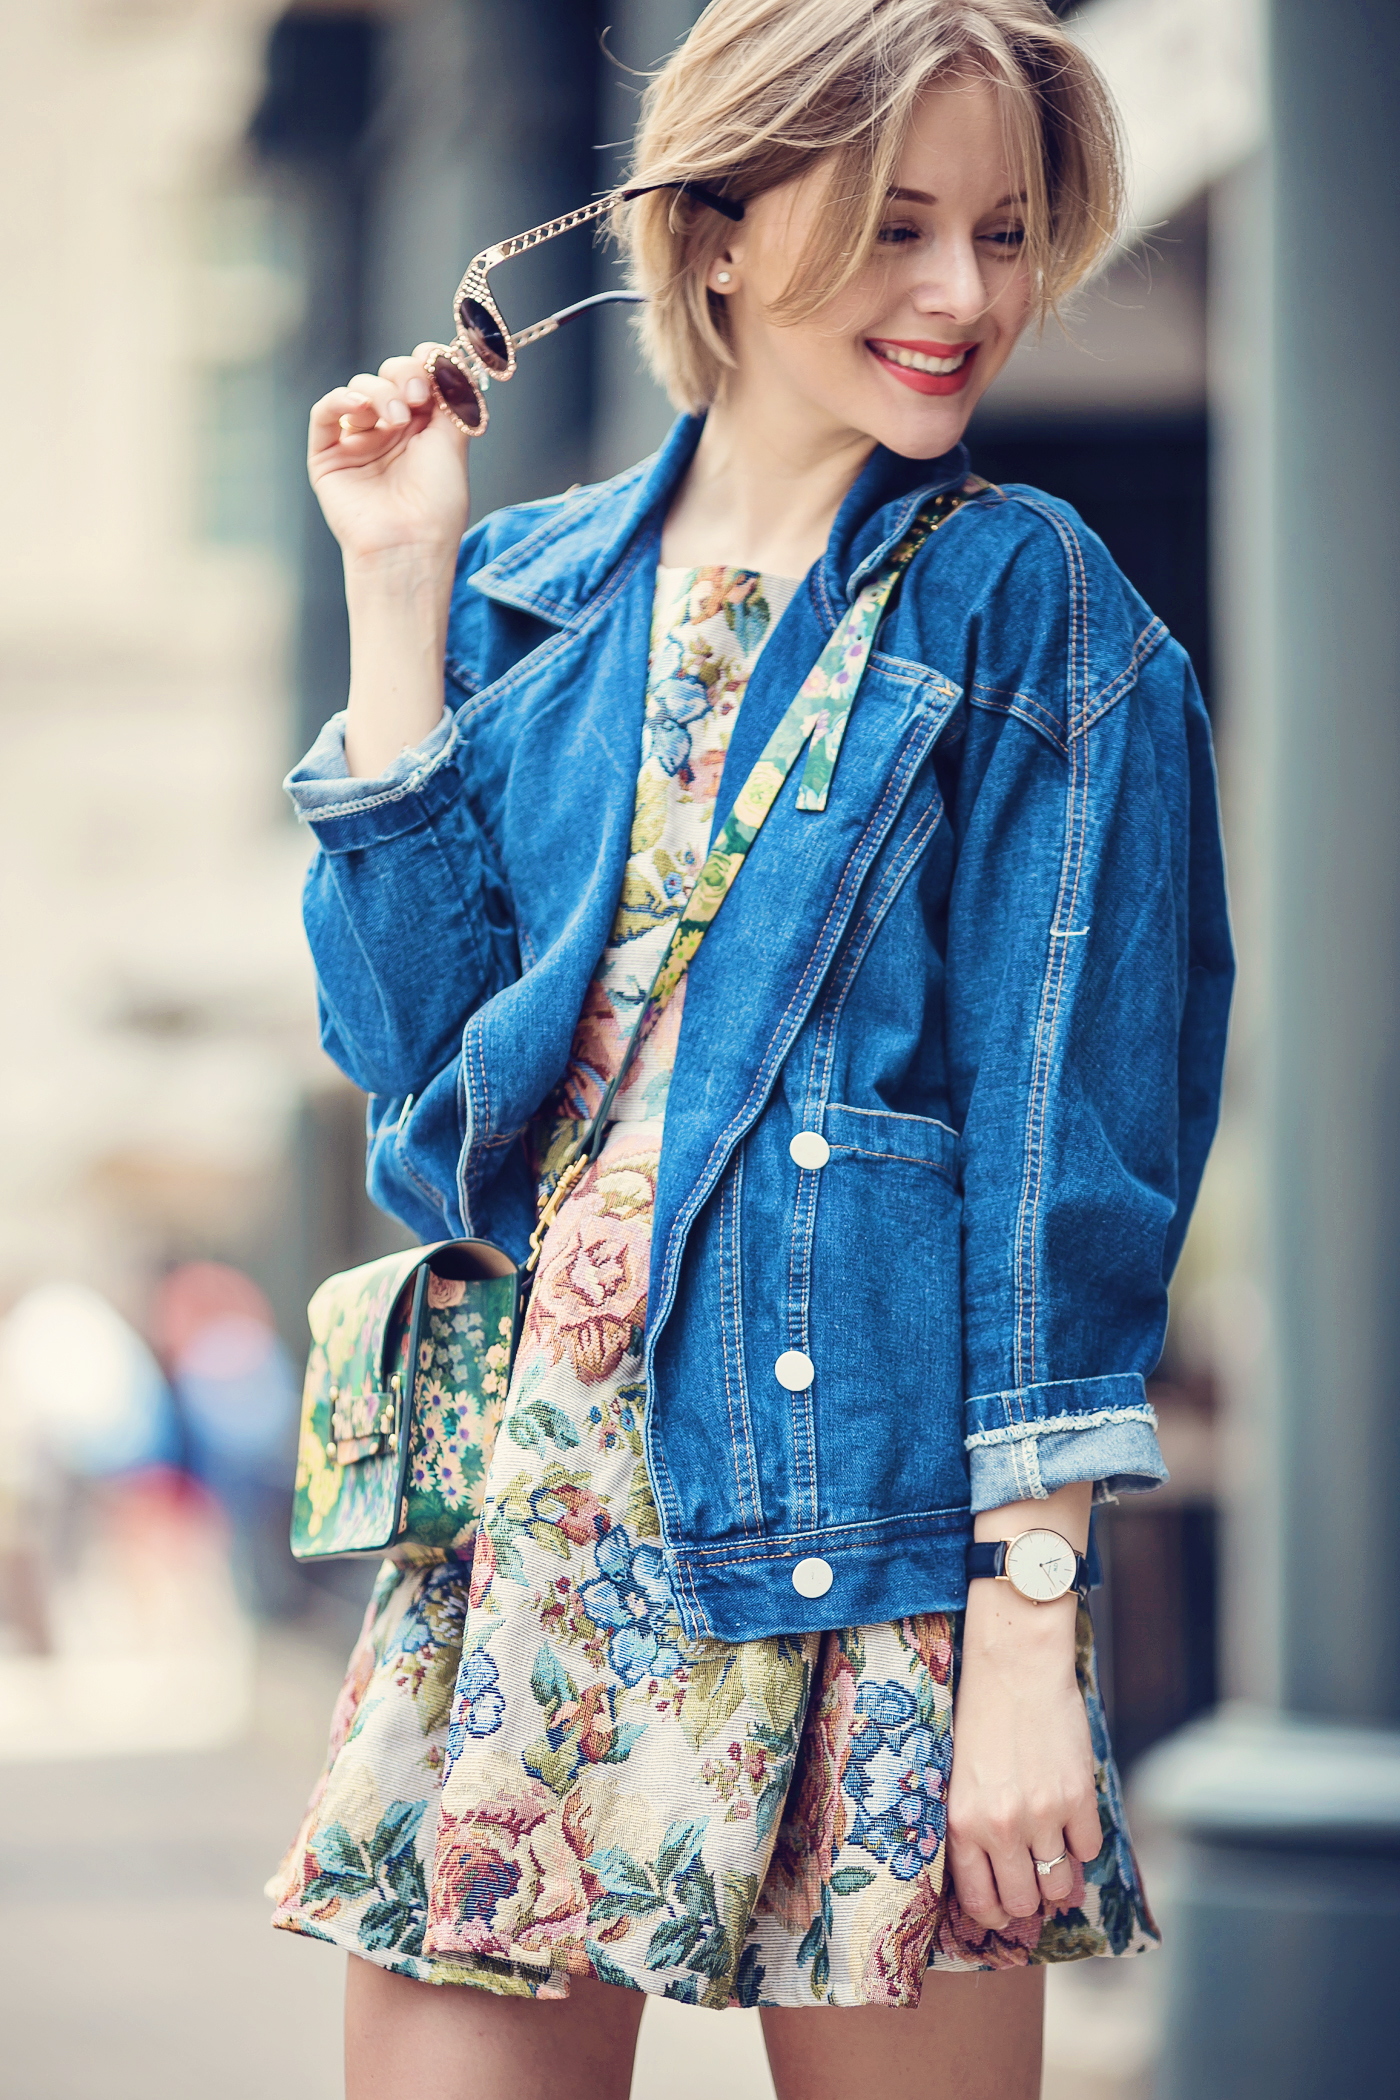 darya kamalova a fashion blogger from thecablook is wearing chicwish dress with denim boyfriend jacket and gold espadrilles with sophie hulme flower bag-46 copy